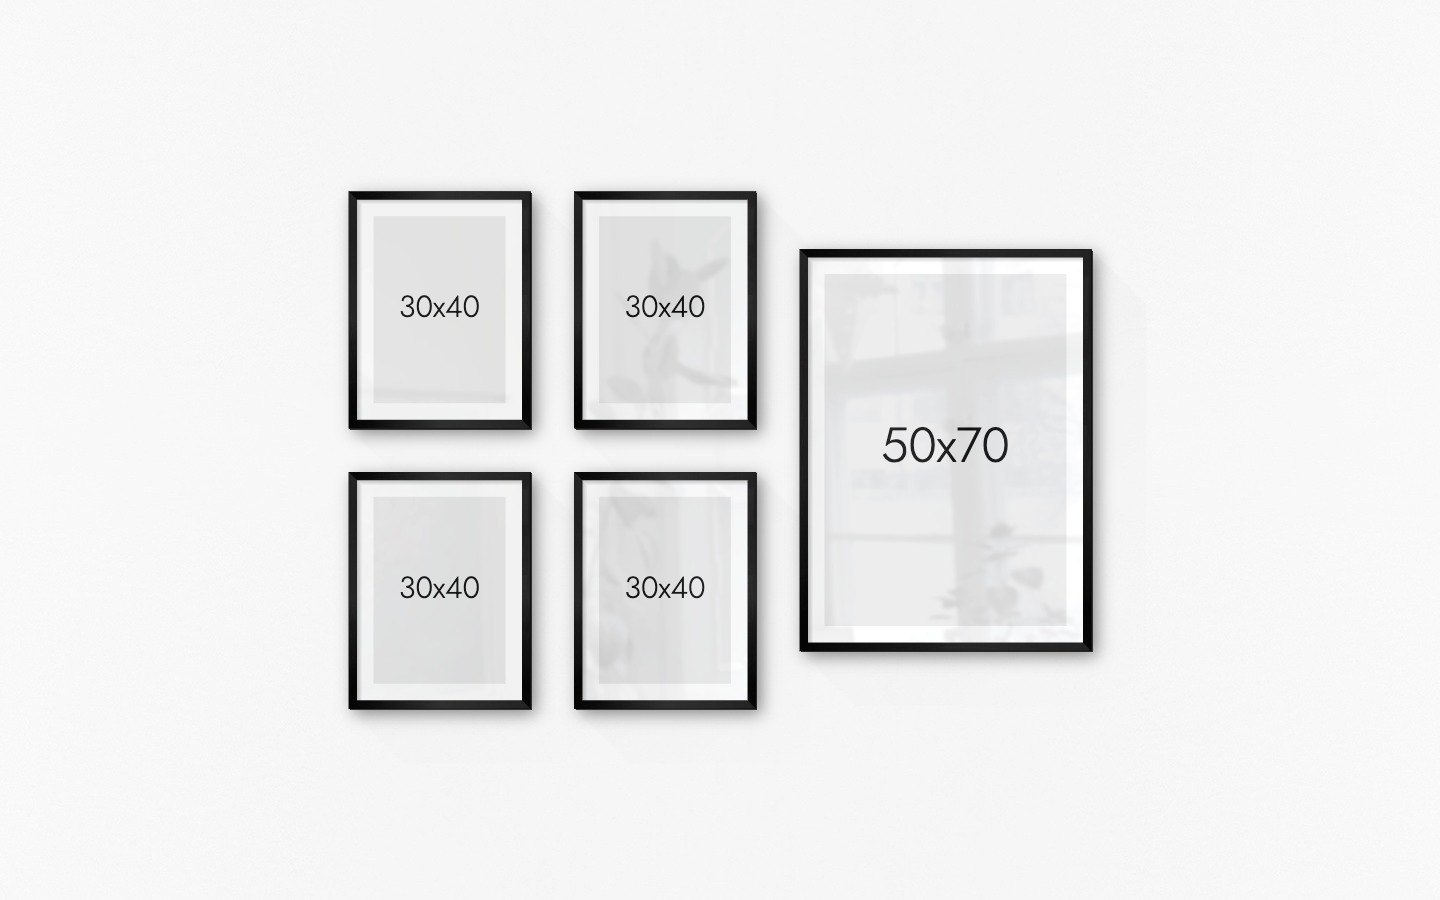 Gallery wall with picture frames in black in sizes 50x70 and 30x40